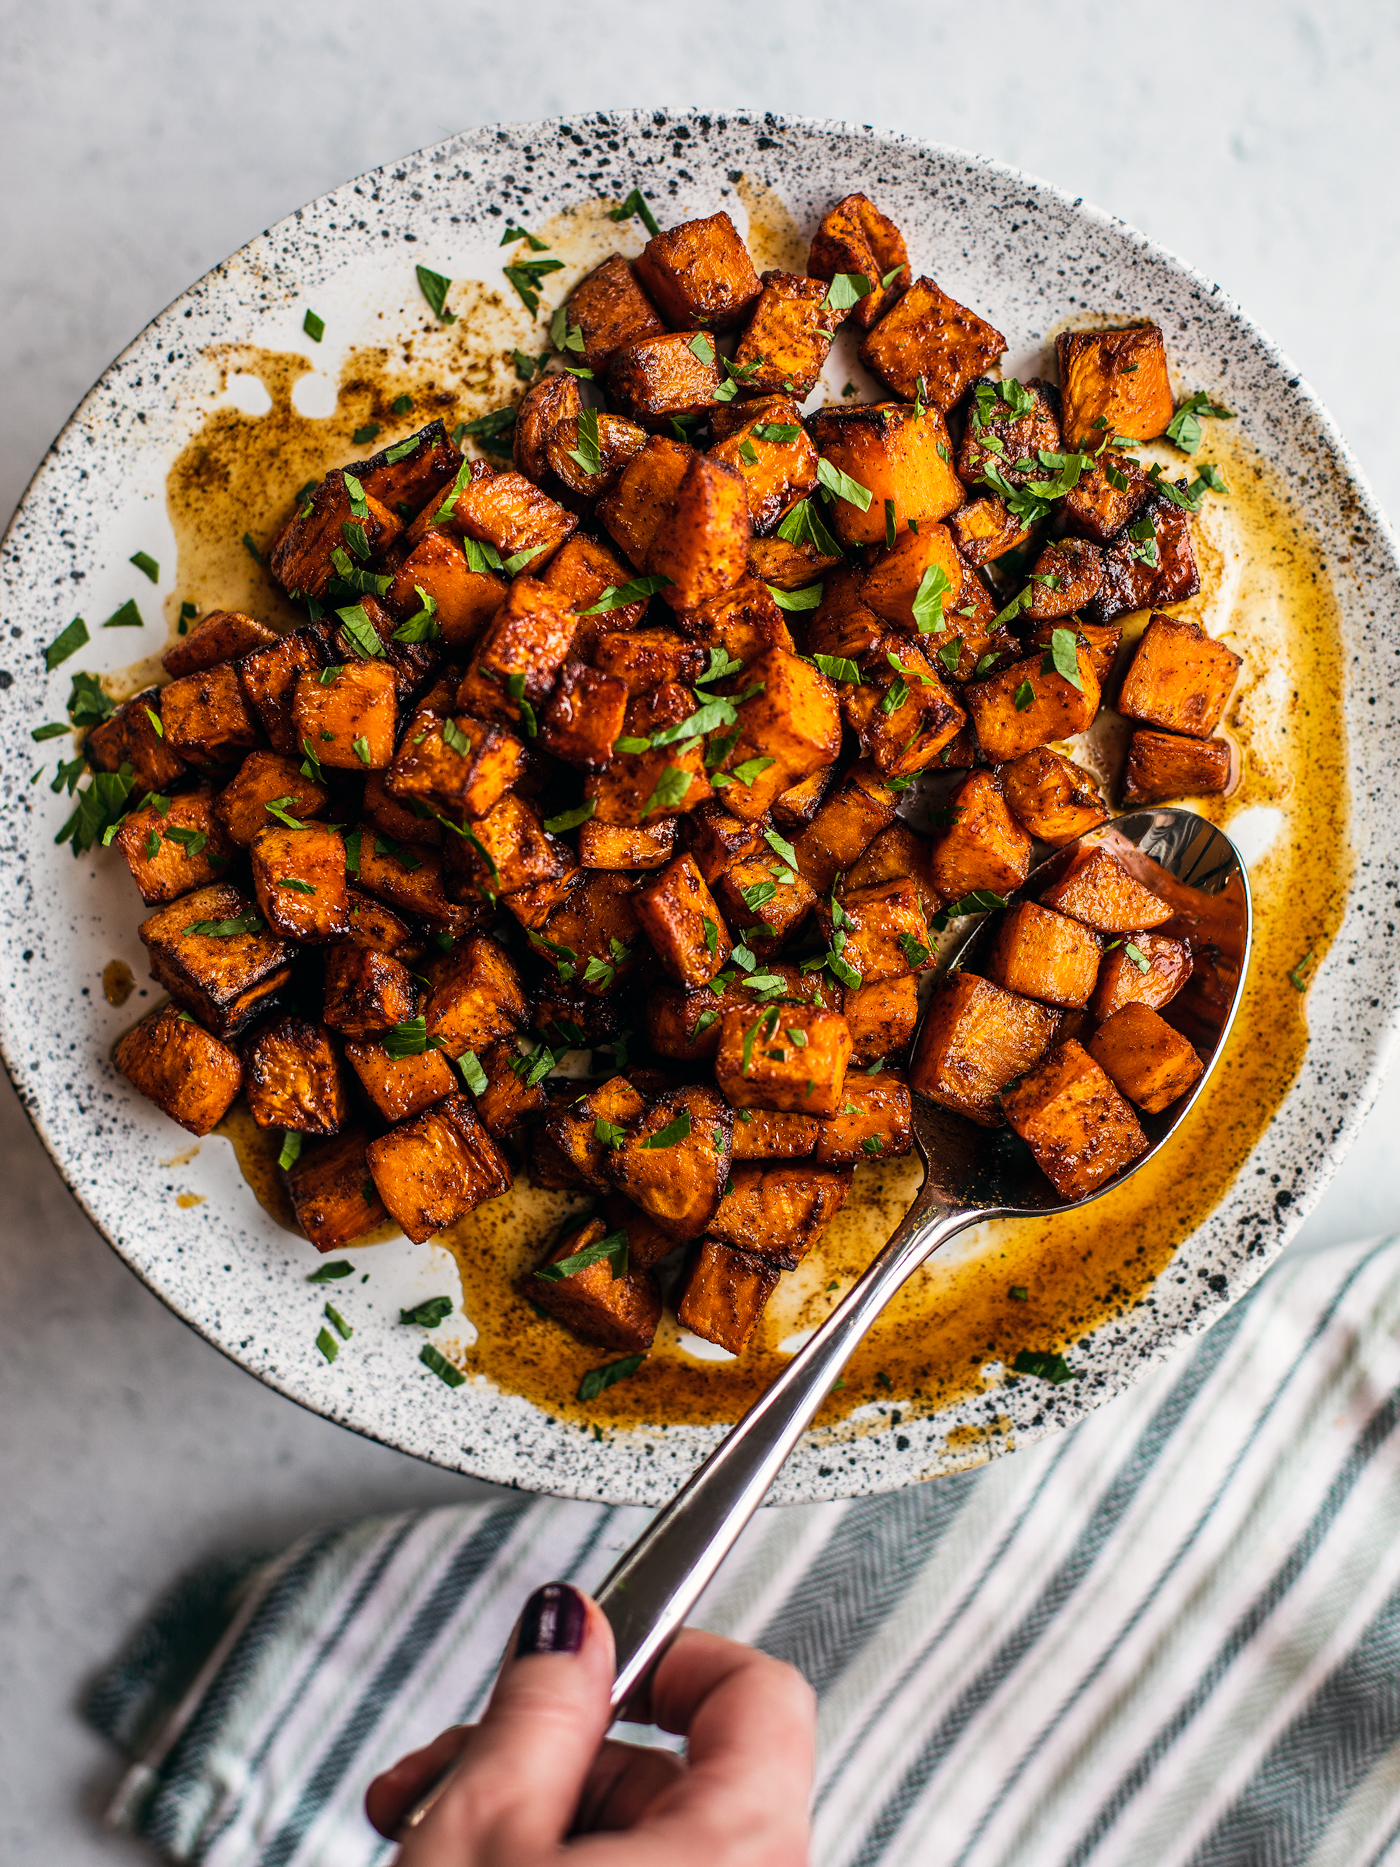 Serving plate of cubed sweet potatoes in honey lime sauce with serving spoon.